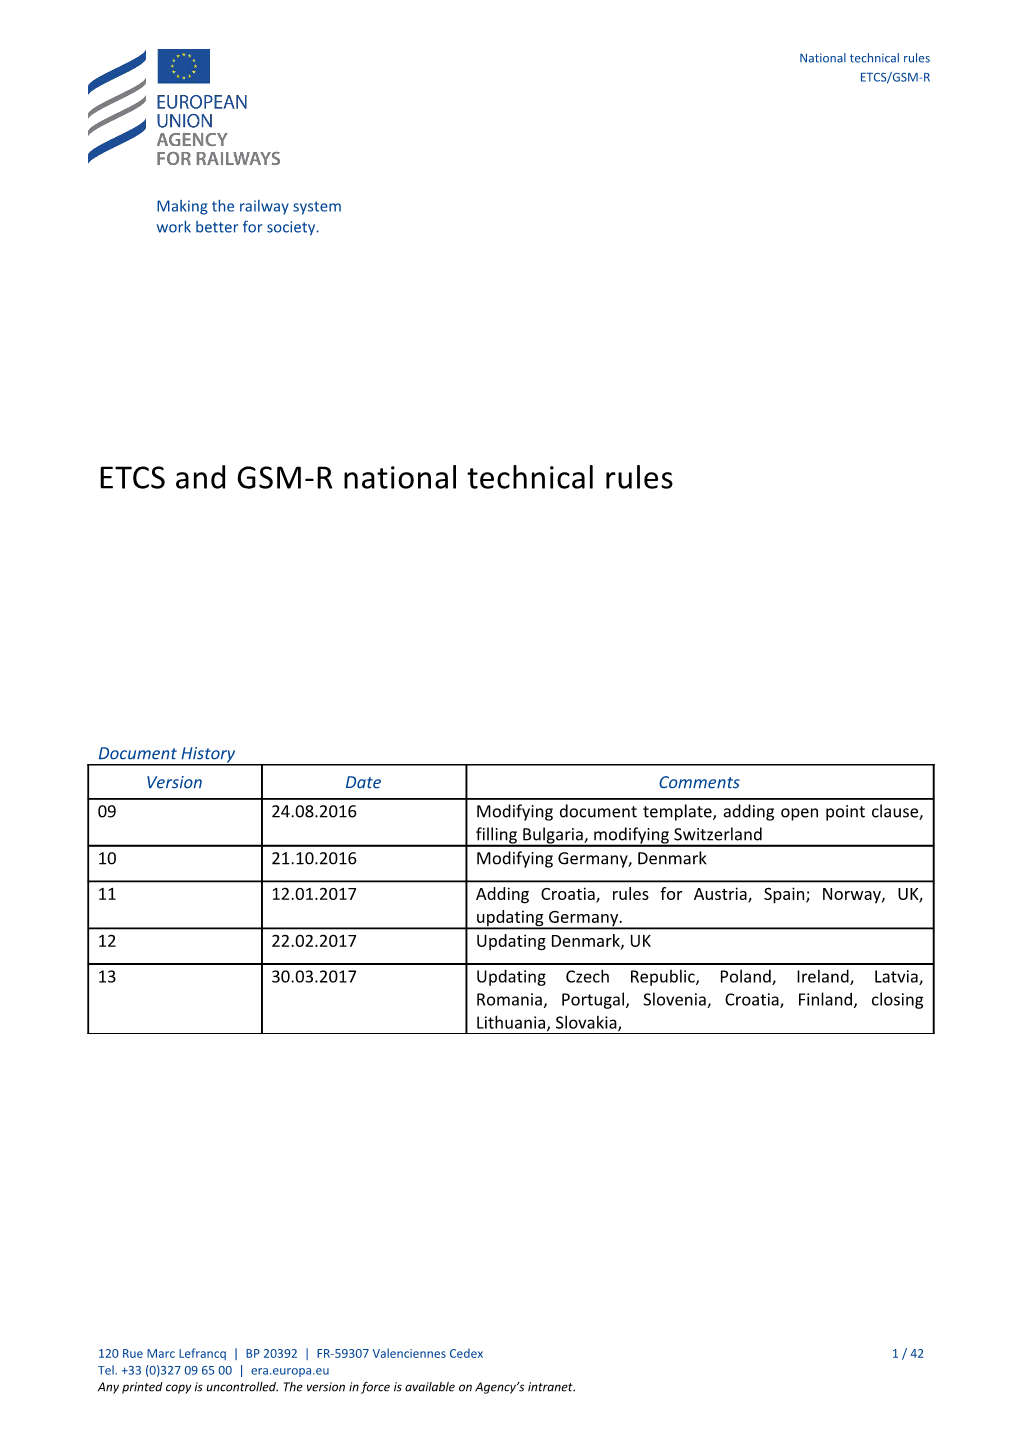 ETCS and GSM-R National Technical Rules V13